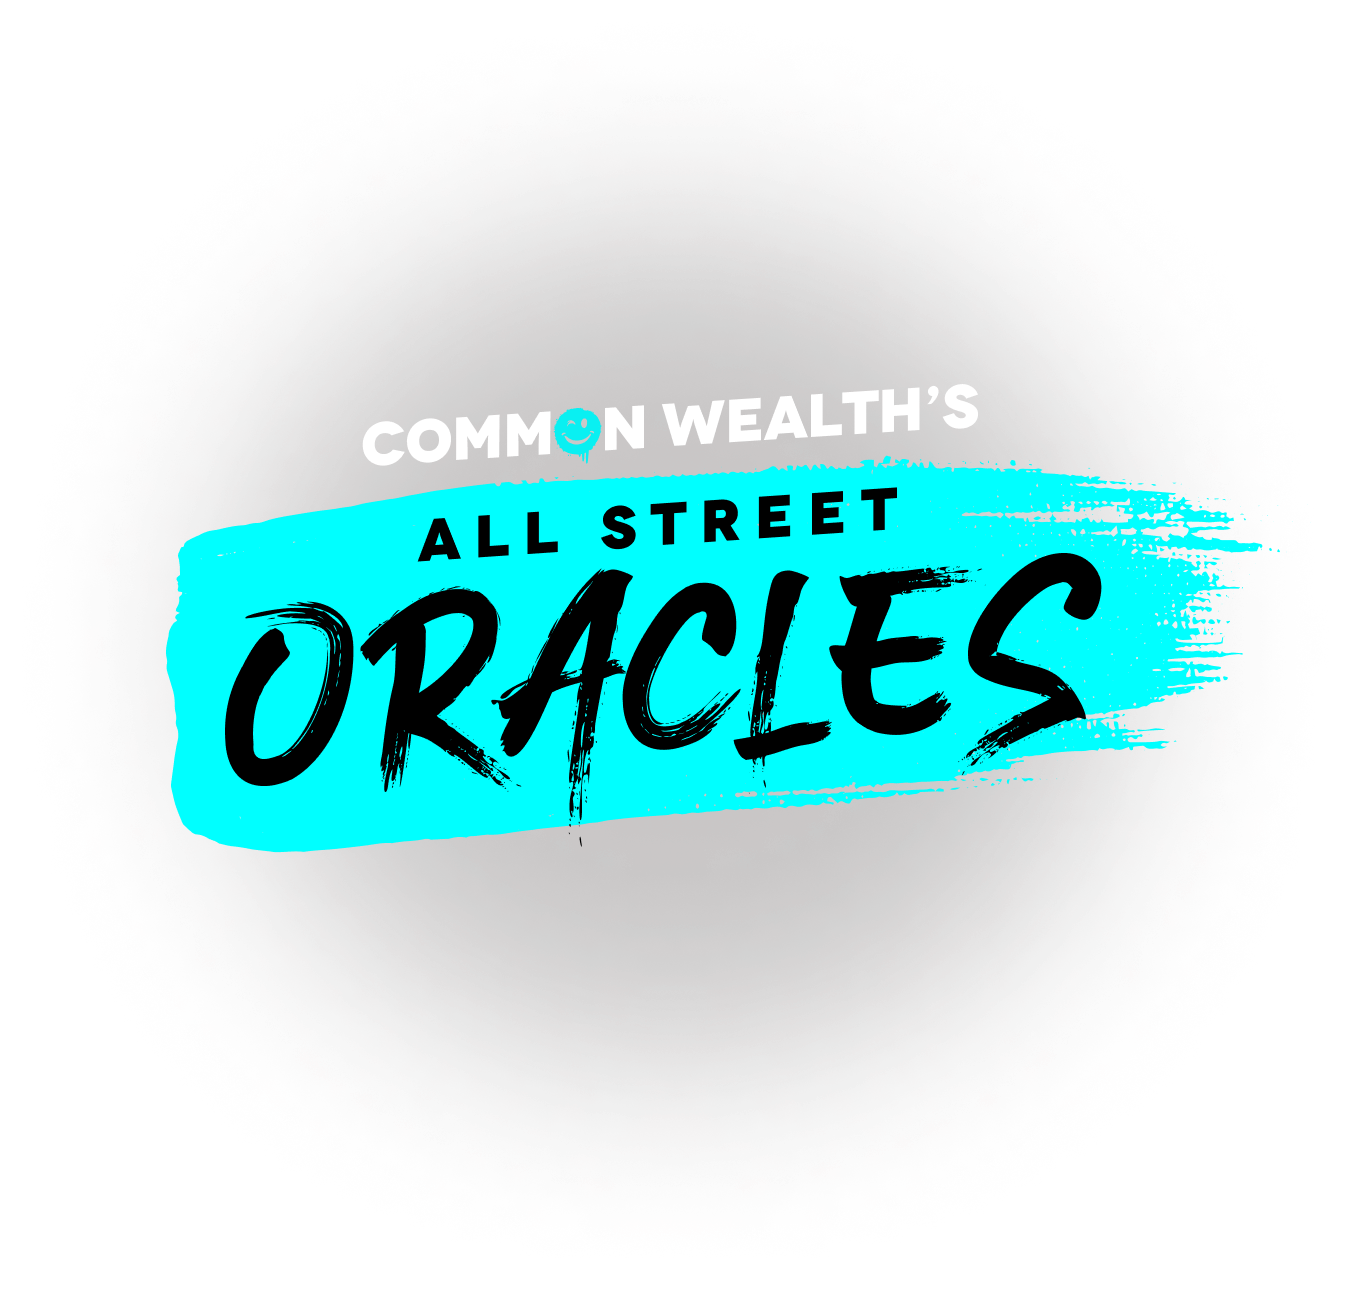 Common wealth's oracles